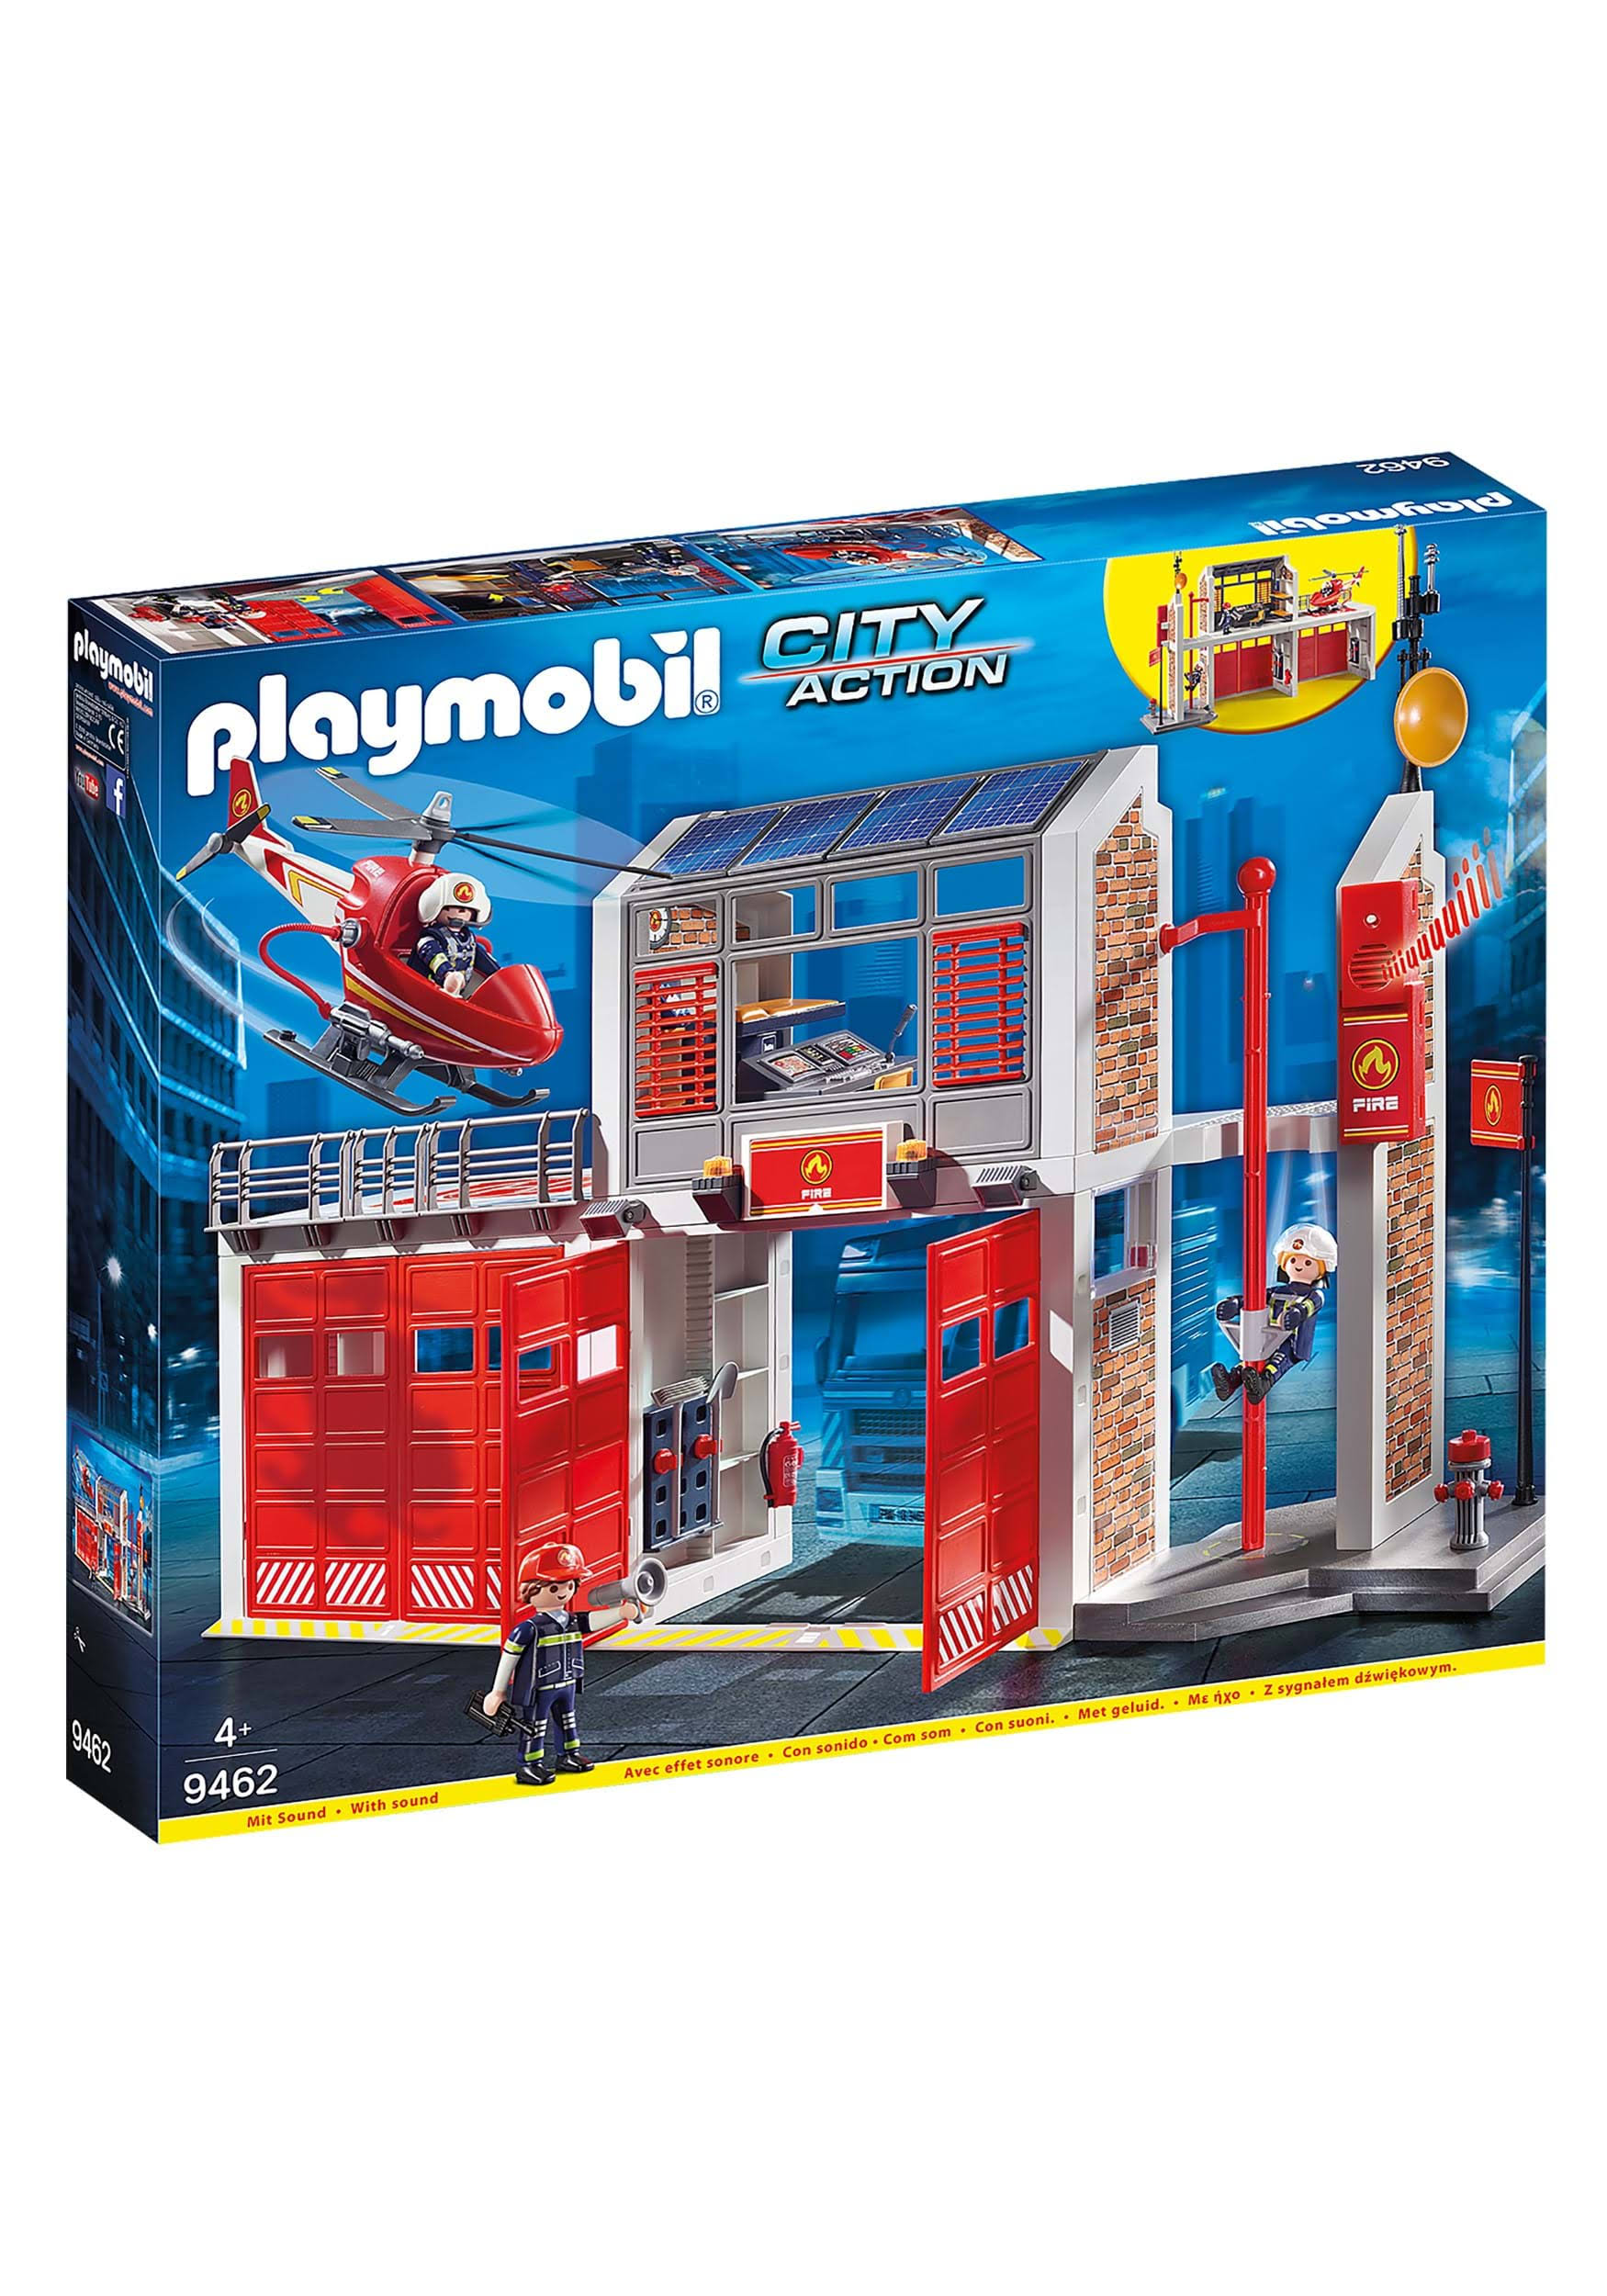 Playmobil City Action Fire Station with Helicopter and Figures Playset